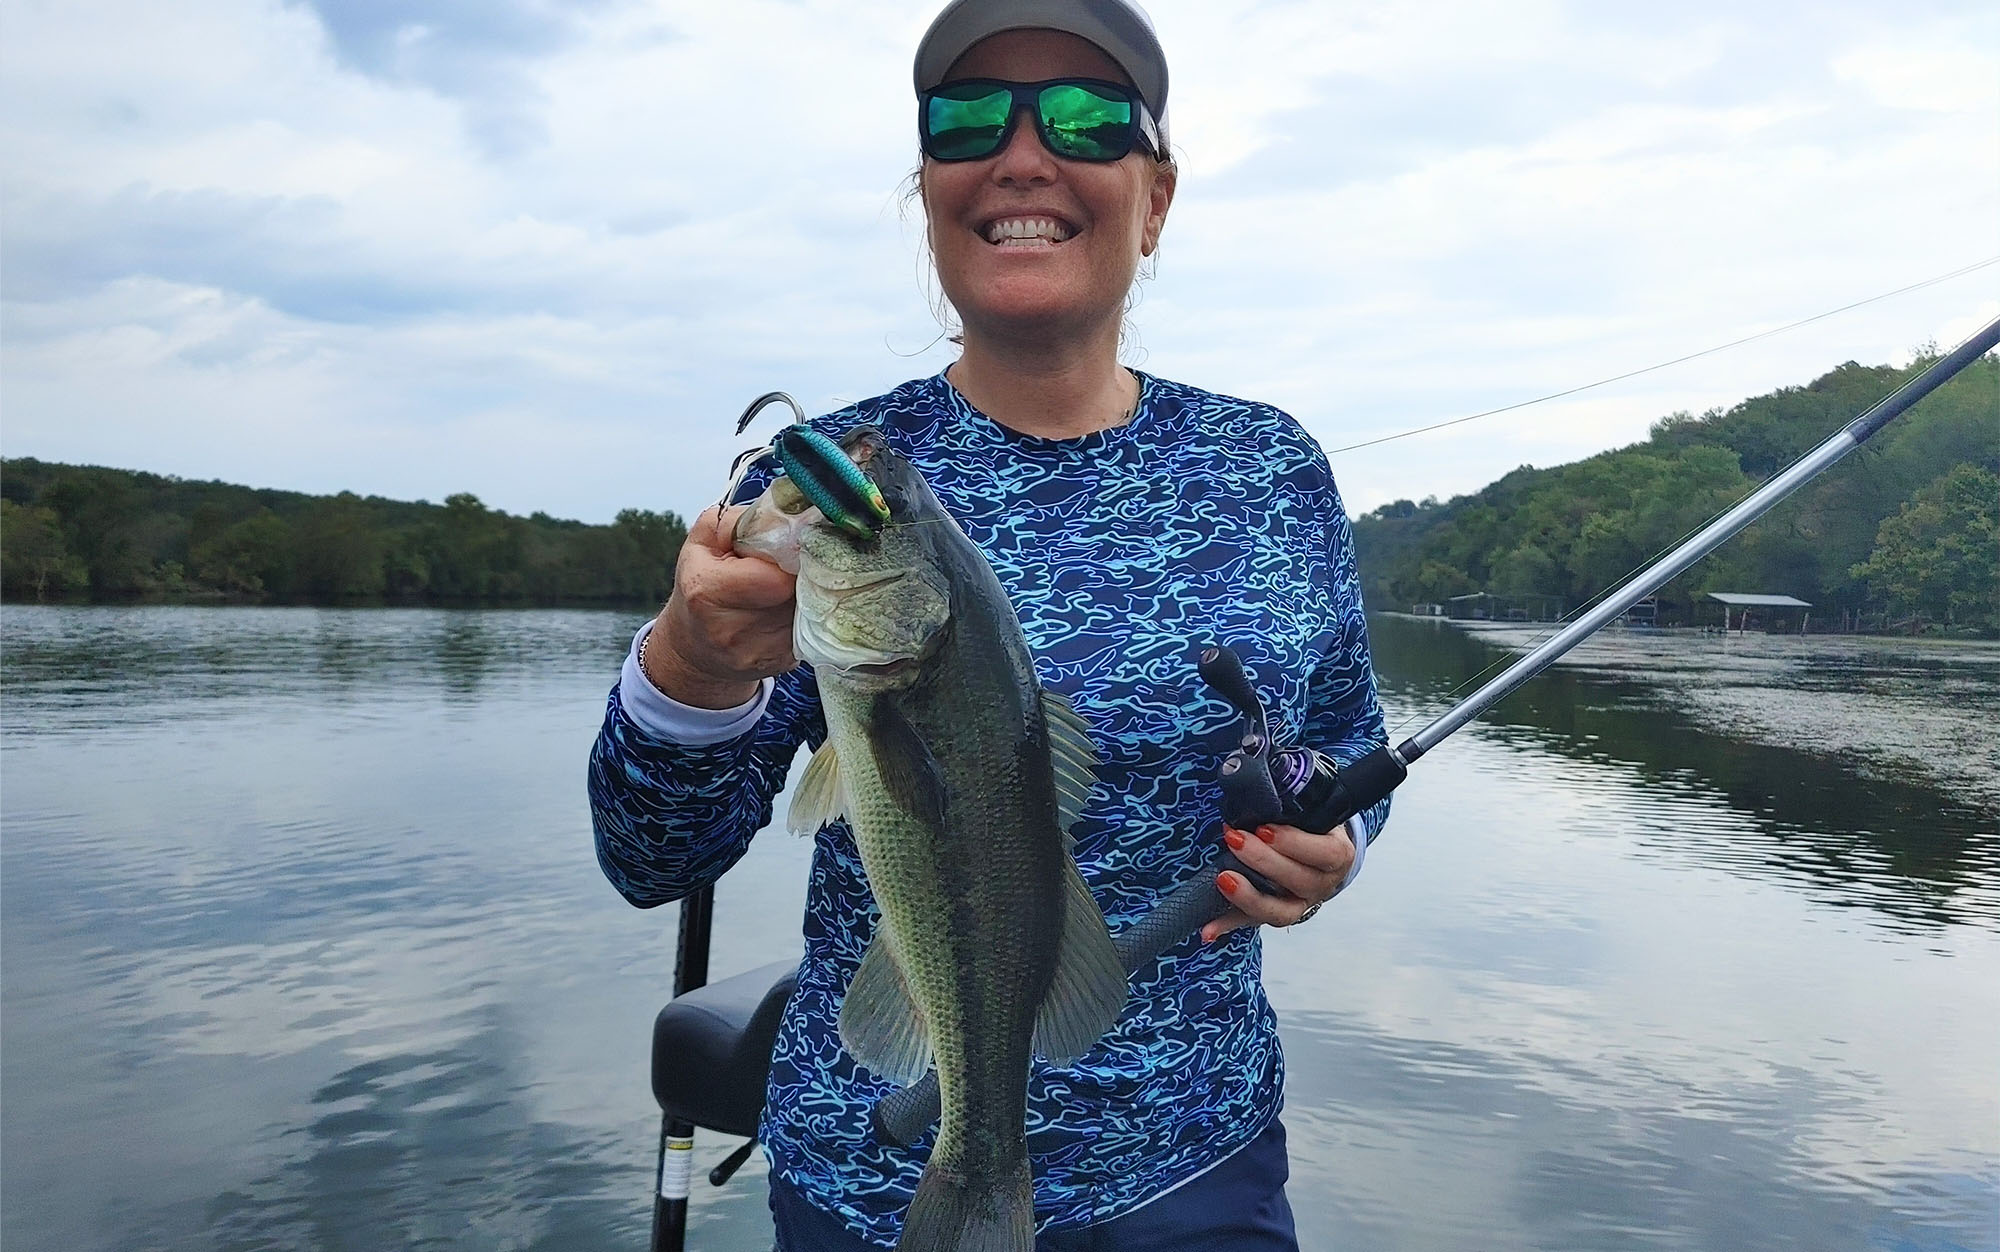 An angler finding success with a frog lure.